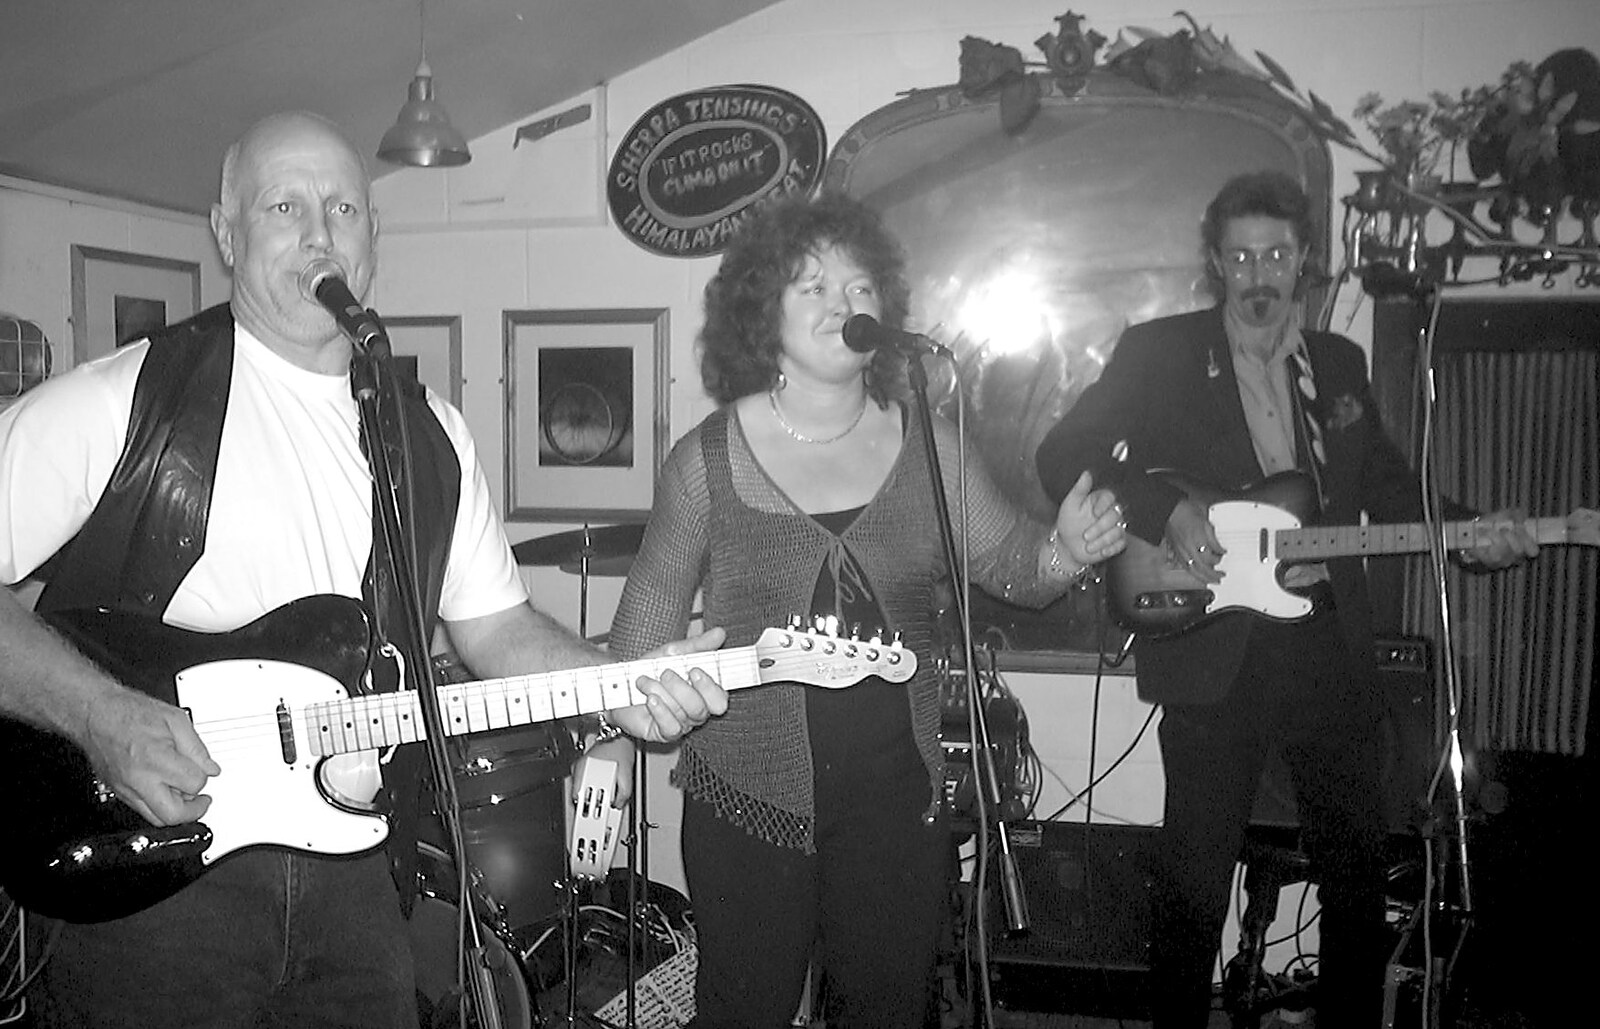 The BBs from The BBs at the Cider Shed, Banham, Norfolk - 24th May 2002